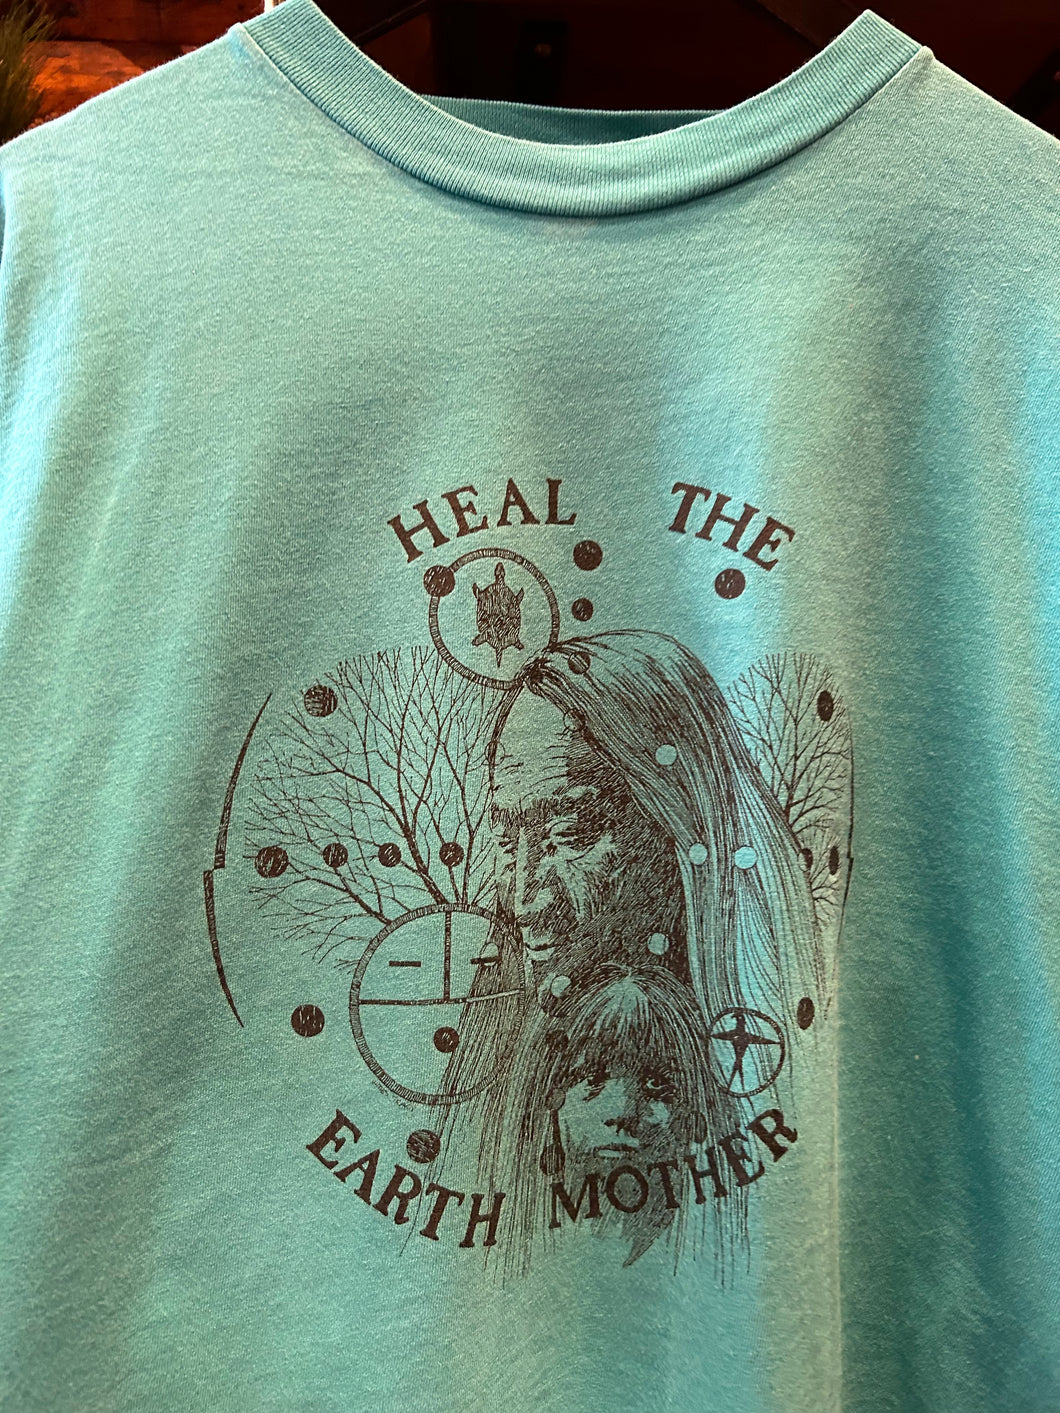 Vintage Heal The Earth Mother, XL